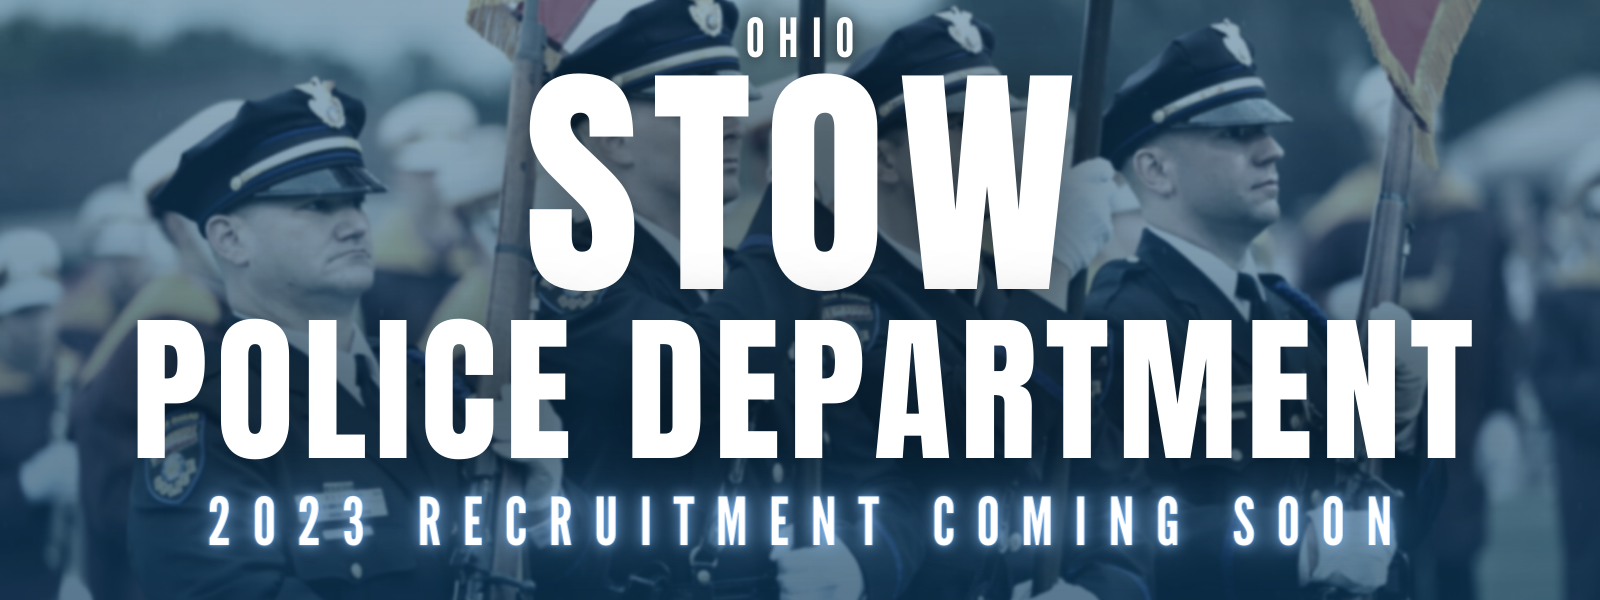 Stow Police Department, OH Police Jobs